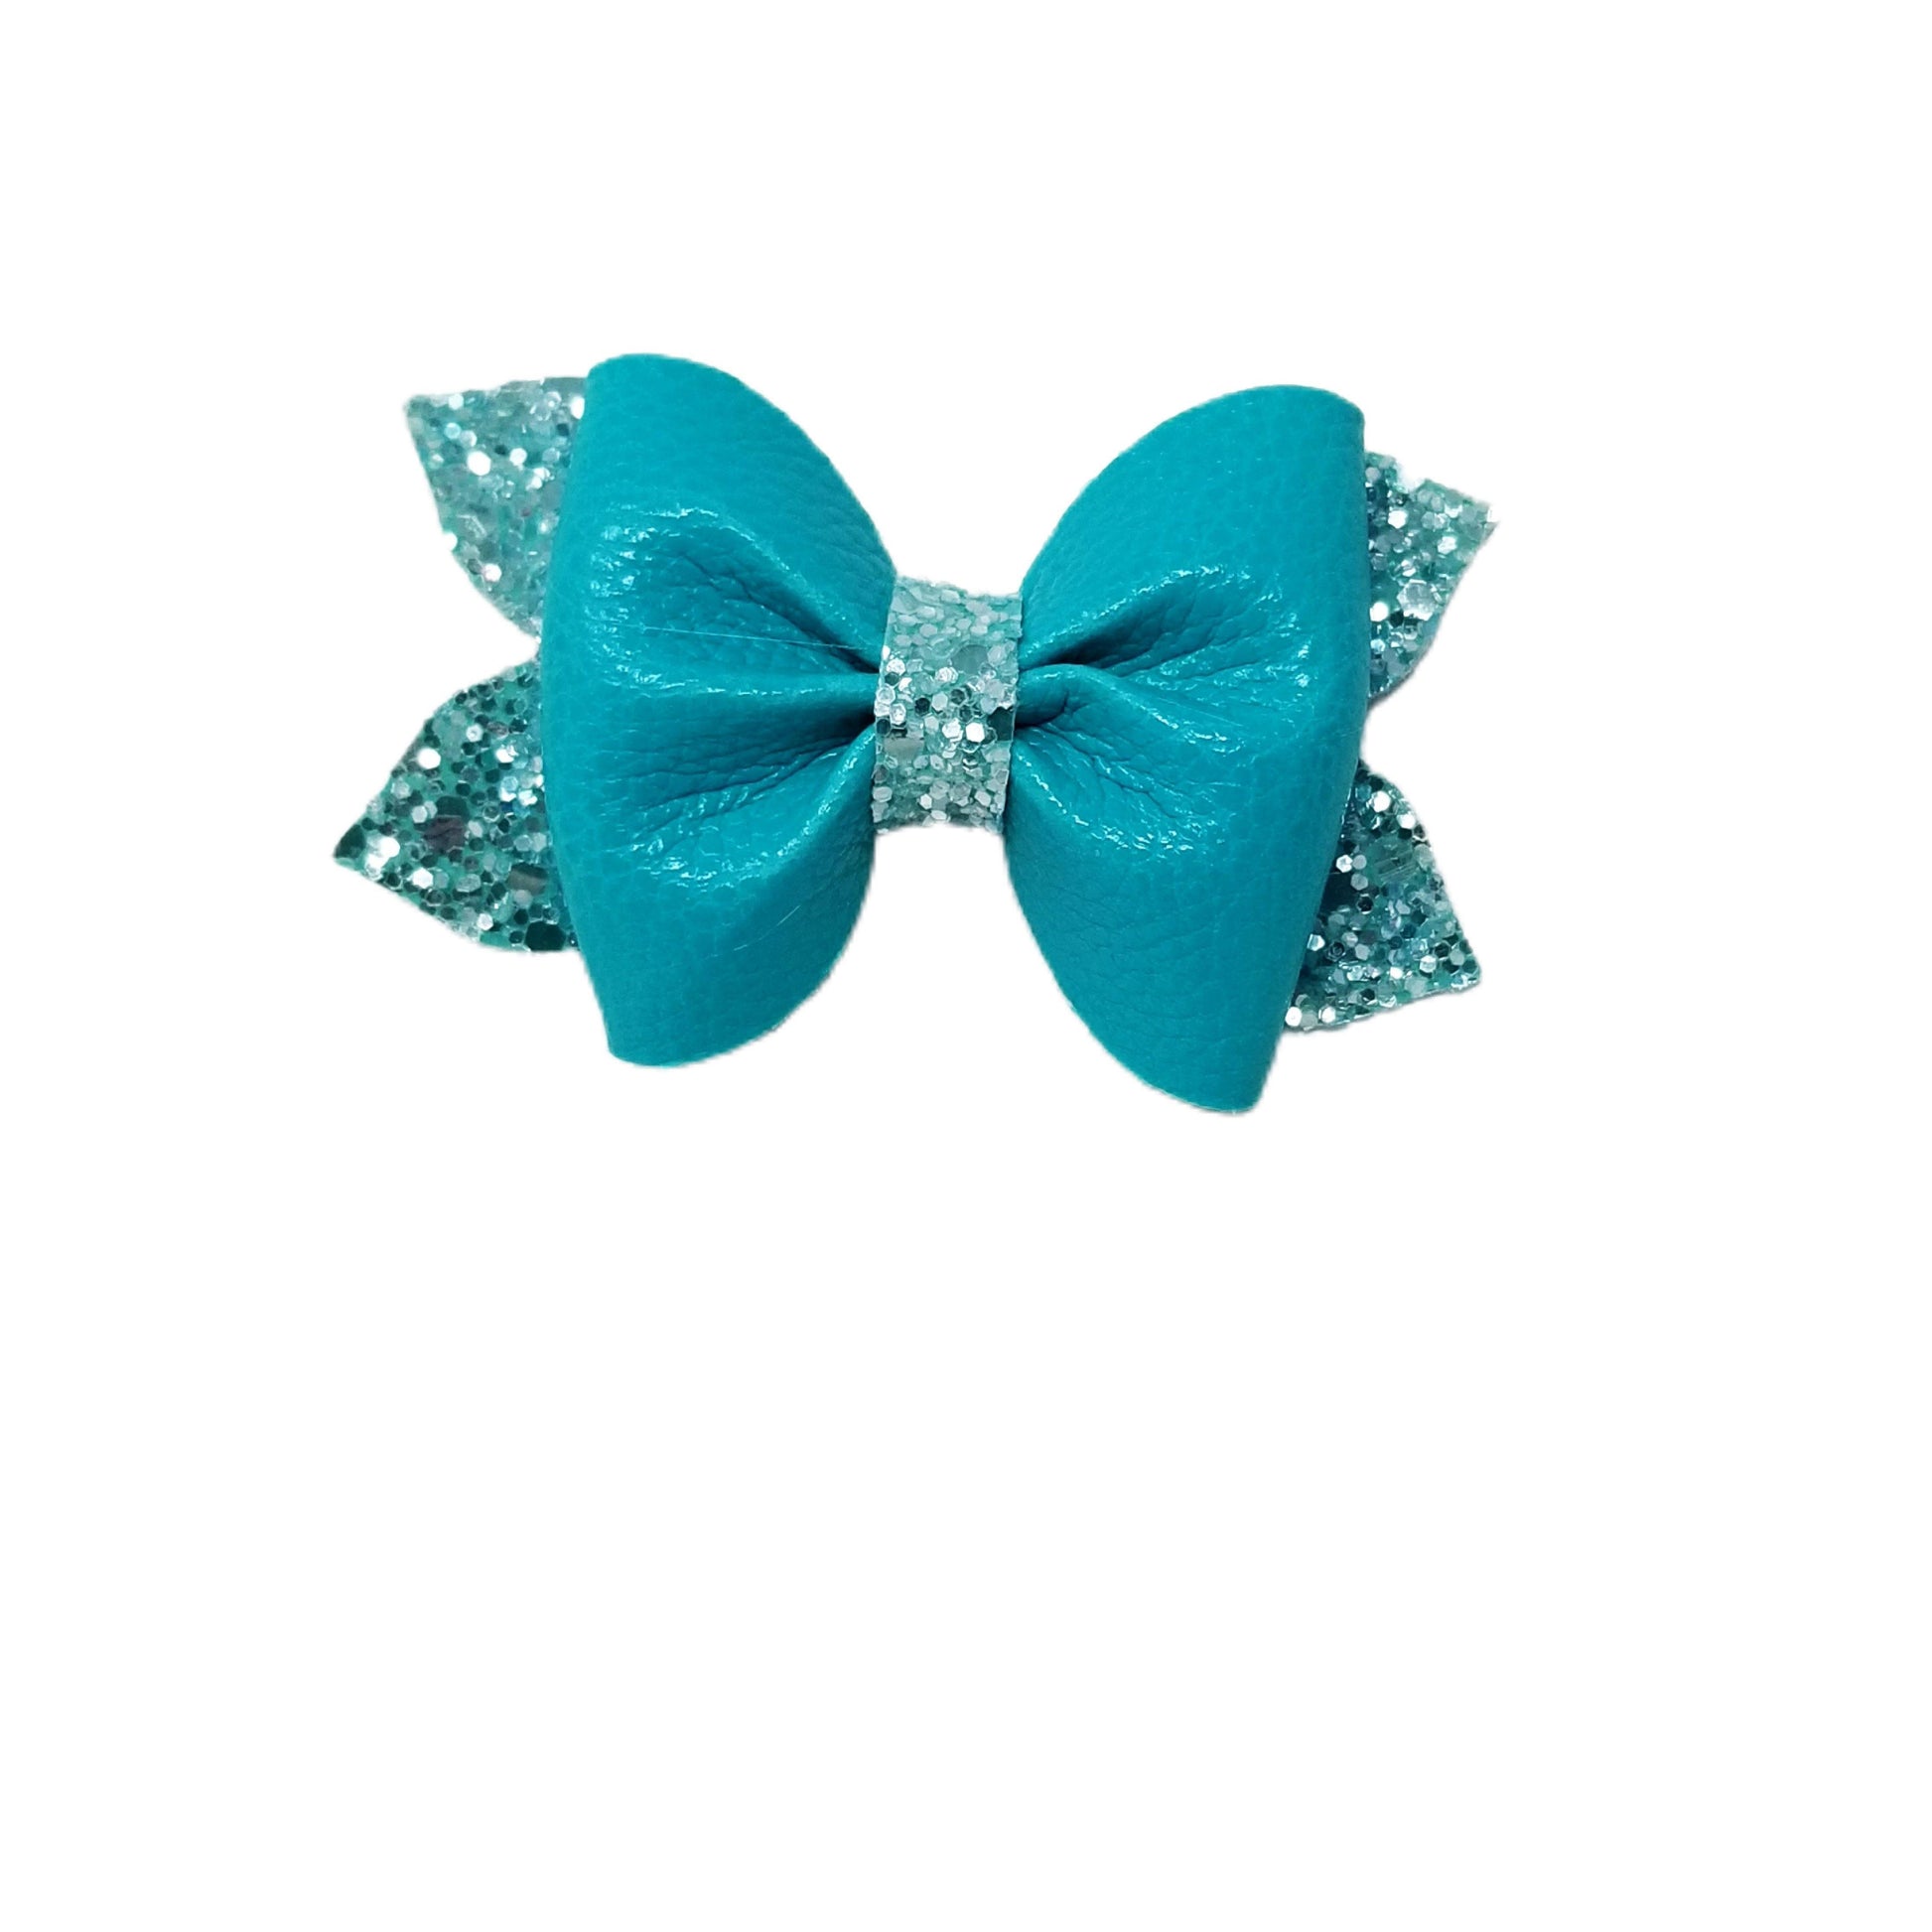 3 inch Teal Pixie Pinch Bow